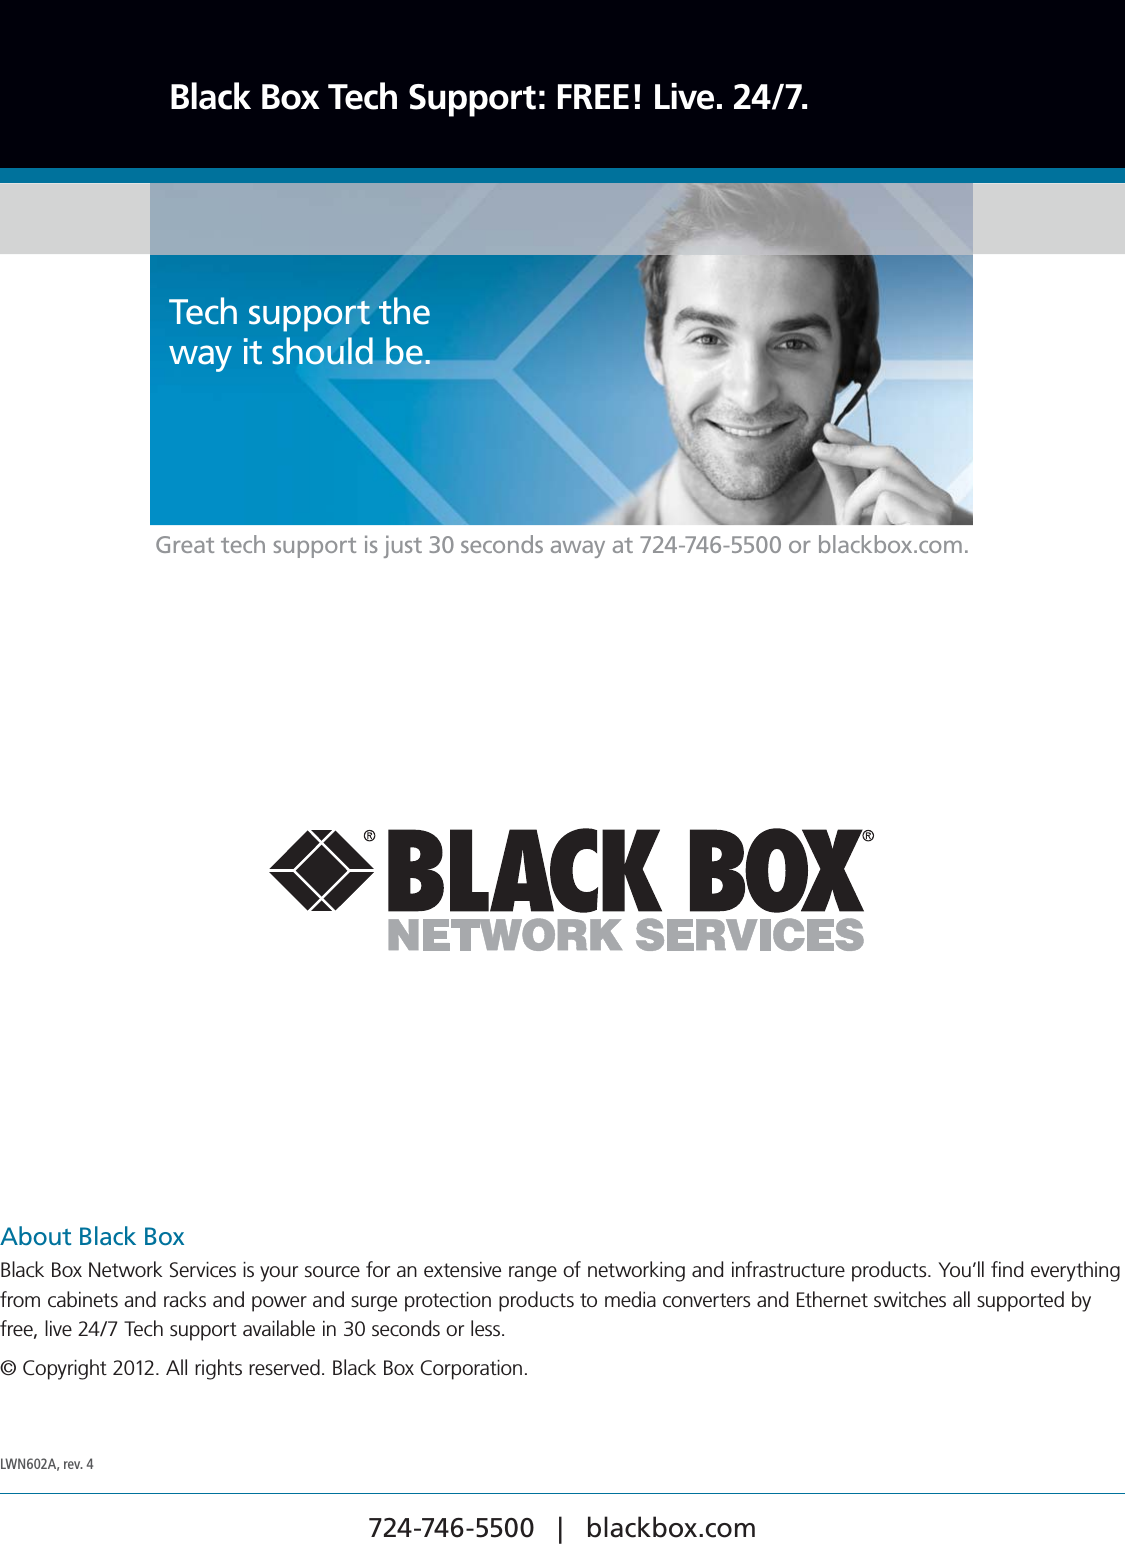 724-746-5500   |   blackbox.com About Black BoxBlack Box Network Services is your source for an extensive range of networking and infrastructure products. You’ll find everything from cabinets and racks and power and surge protection products to media converters and Ethernet switches all supported by free, live 24/7 Tech support available in 30 seconds or less.© Copyright 2012. All rights reserved. Black Box Corporation.Black Box Tech Support: FREE! Live. 24/7.Tech support the  way it should be. Great tech support is just 30 seconds away at 724-746-5500 or blackbox.com. LWN602A, rev. 4